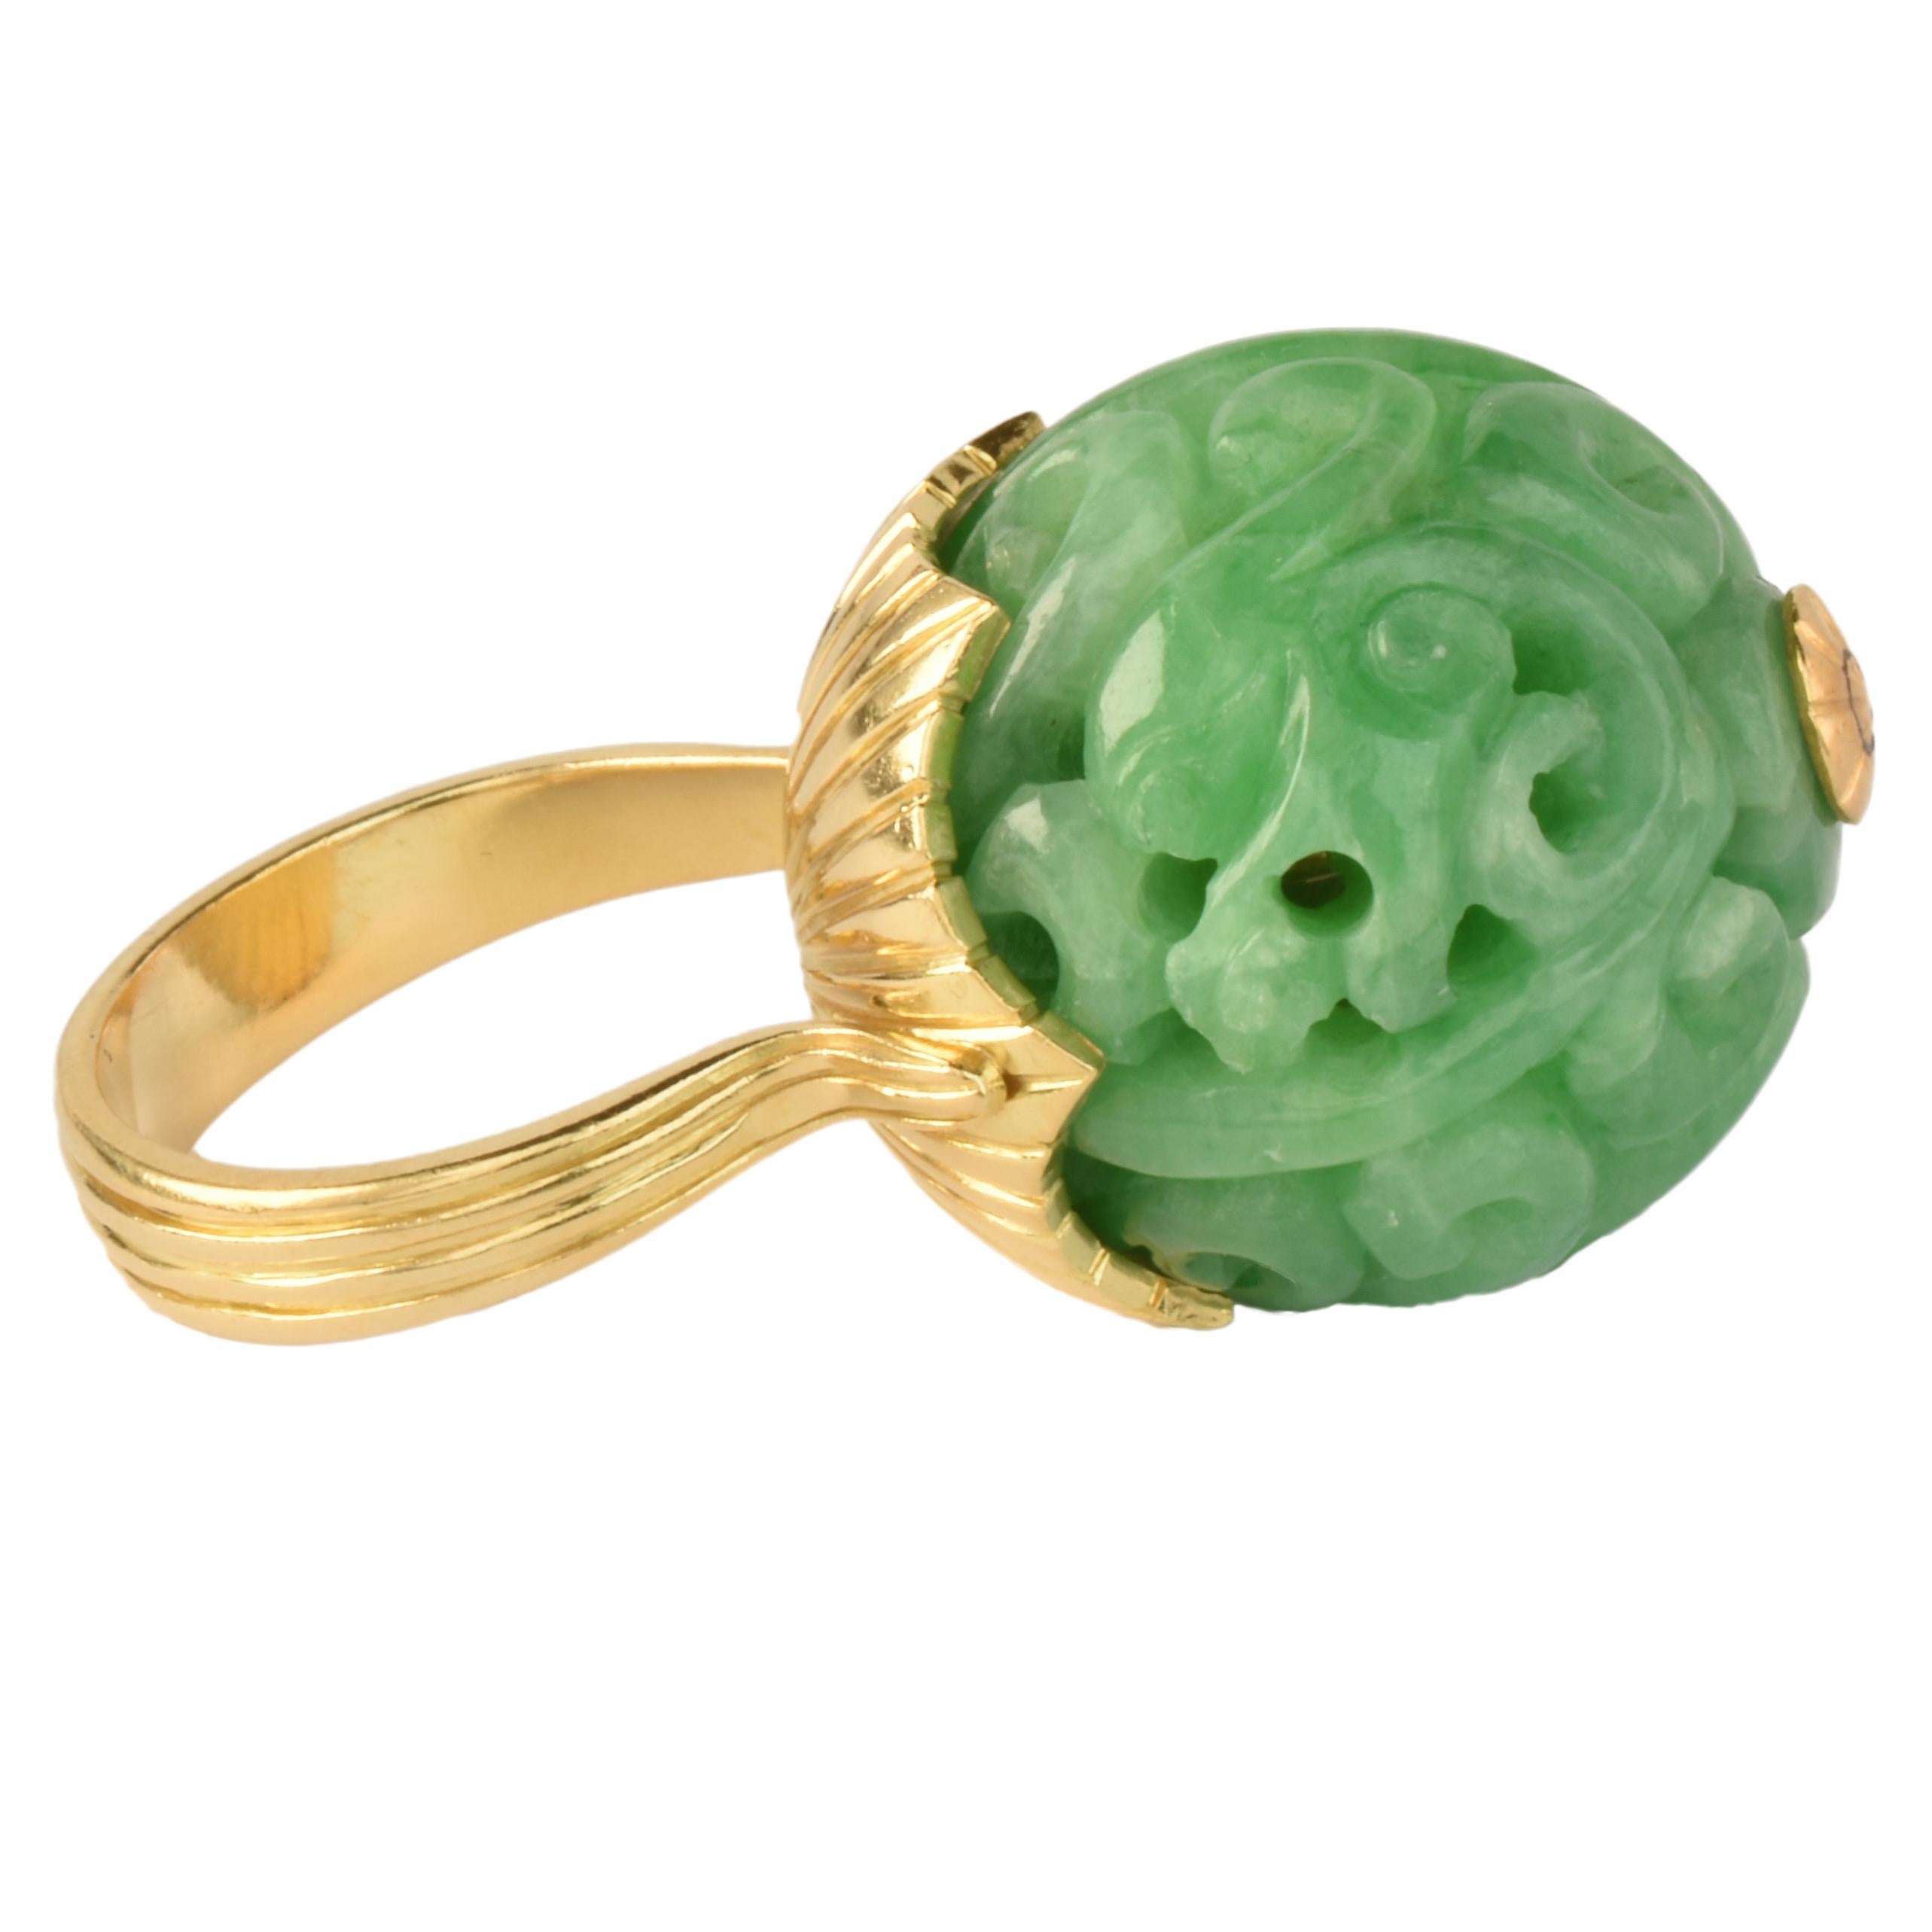 A bold & unusual 1970s ring. Fashioned from 18k yellow gold with reeded texture supporting a carved jadeite bead.